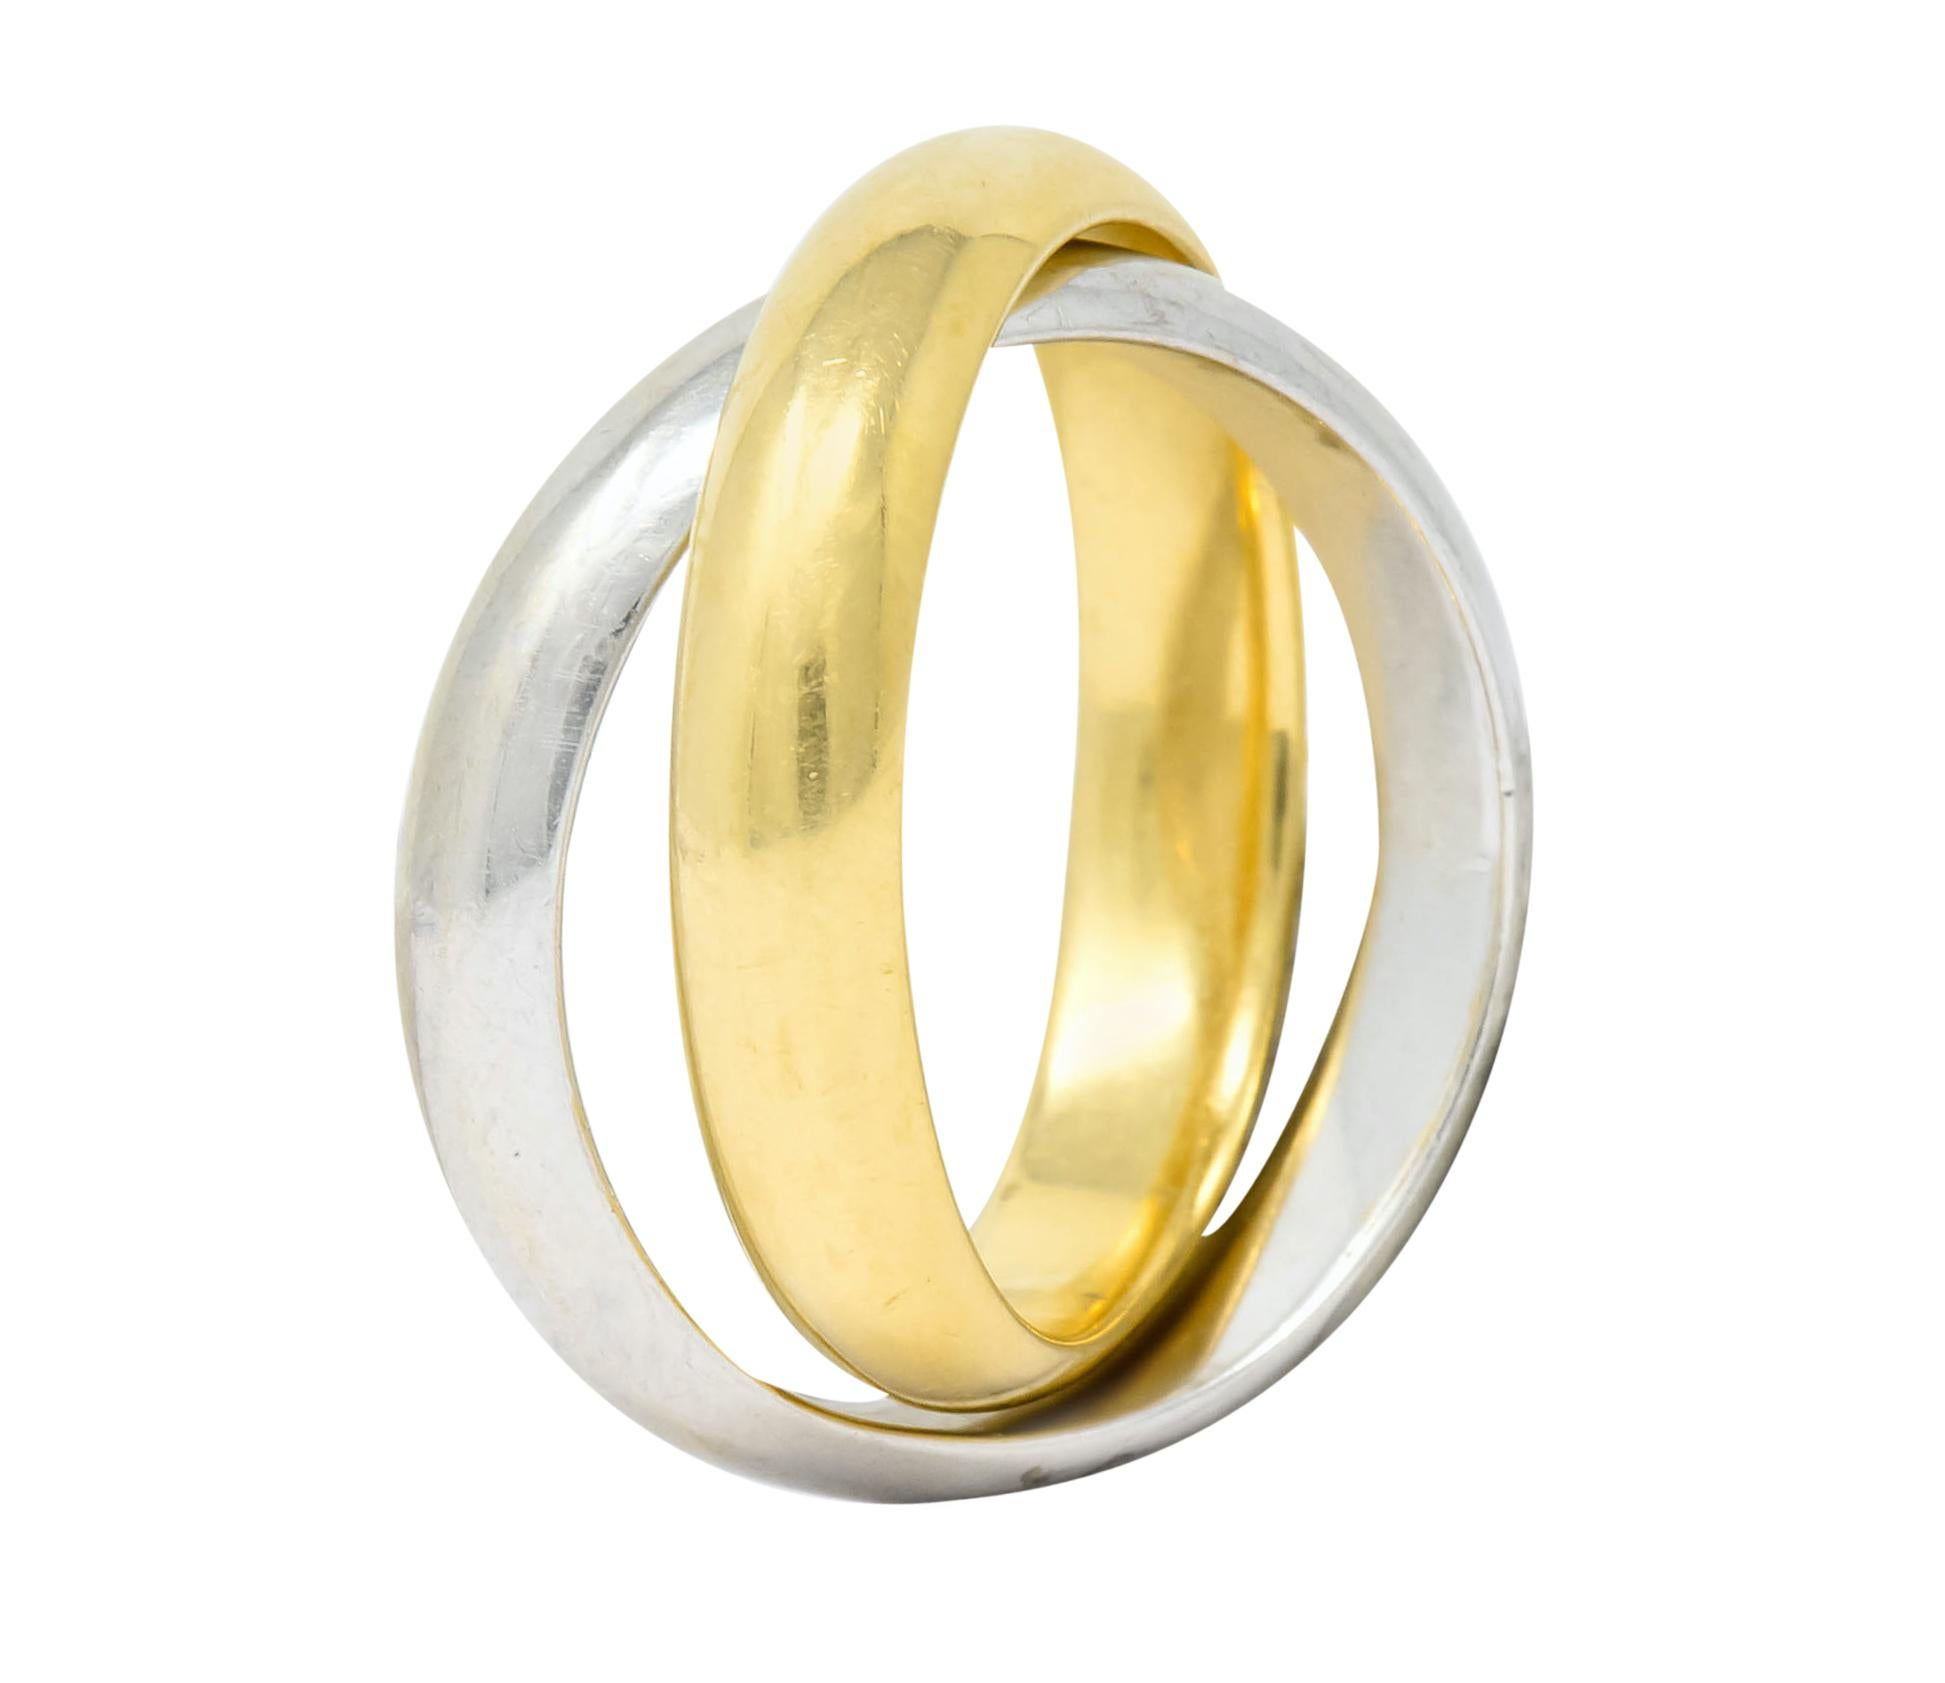 Designed as two intersecting white and yellow gold band rings with a high polished finish

From the Melody collection circa 1980

Fully signed Paloma Picasso Tiffany & Co.

Stamped Au750 for 18 karat gold

Ring Size: 5 & not sizable

Top measures: